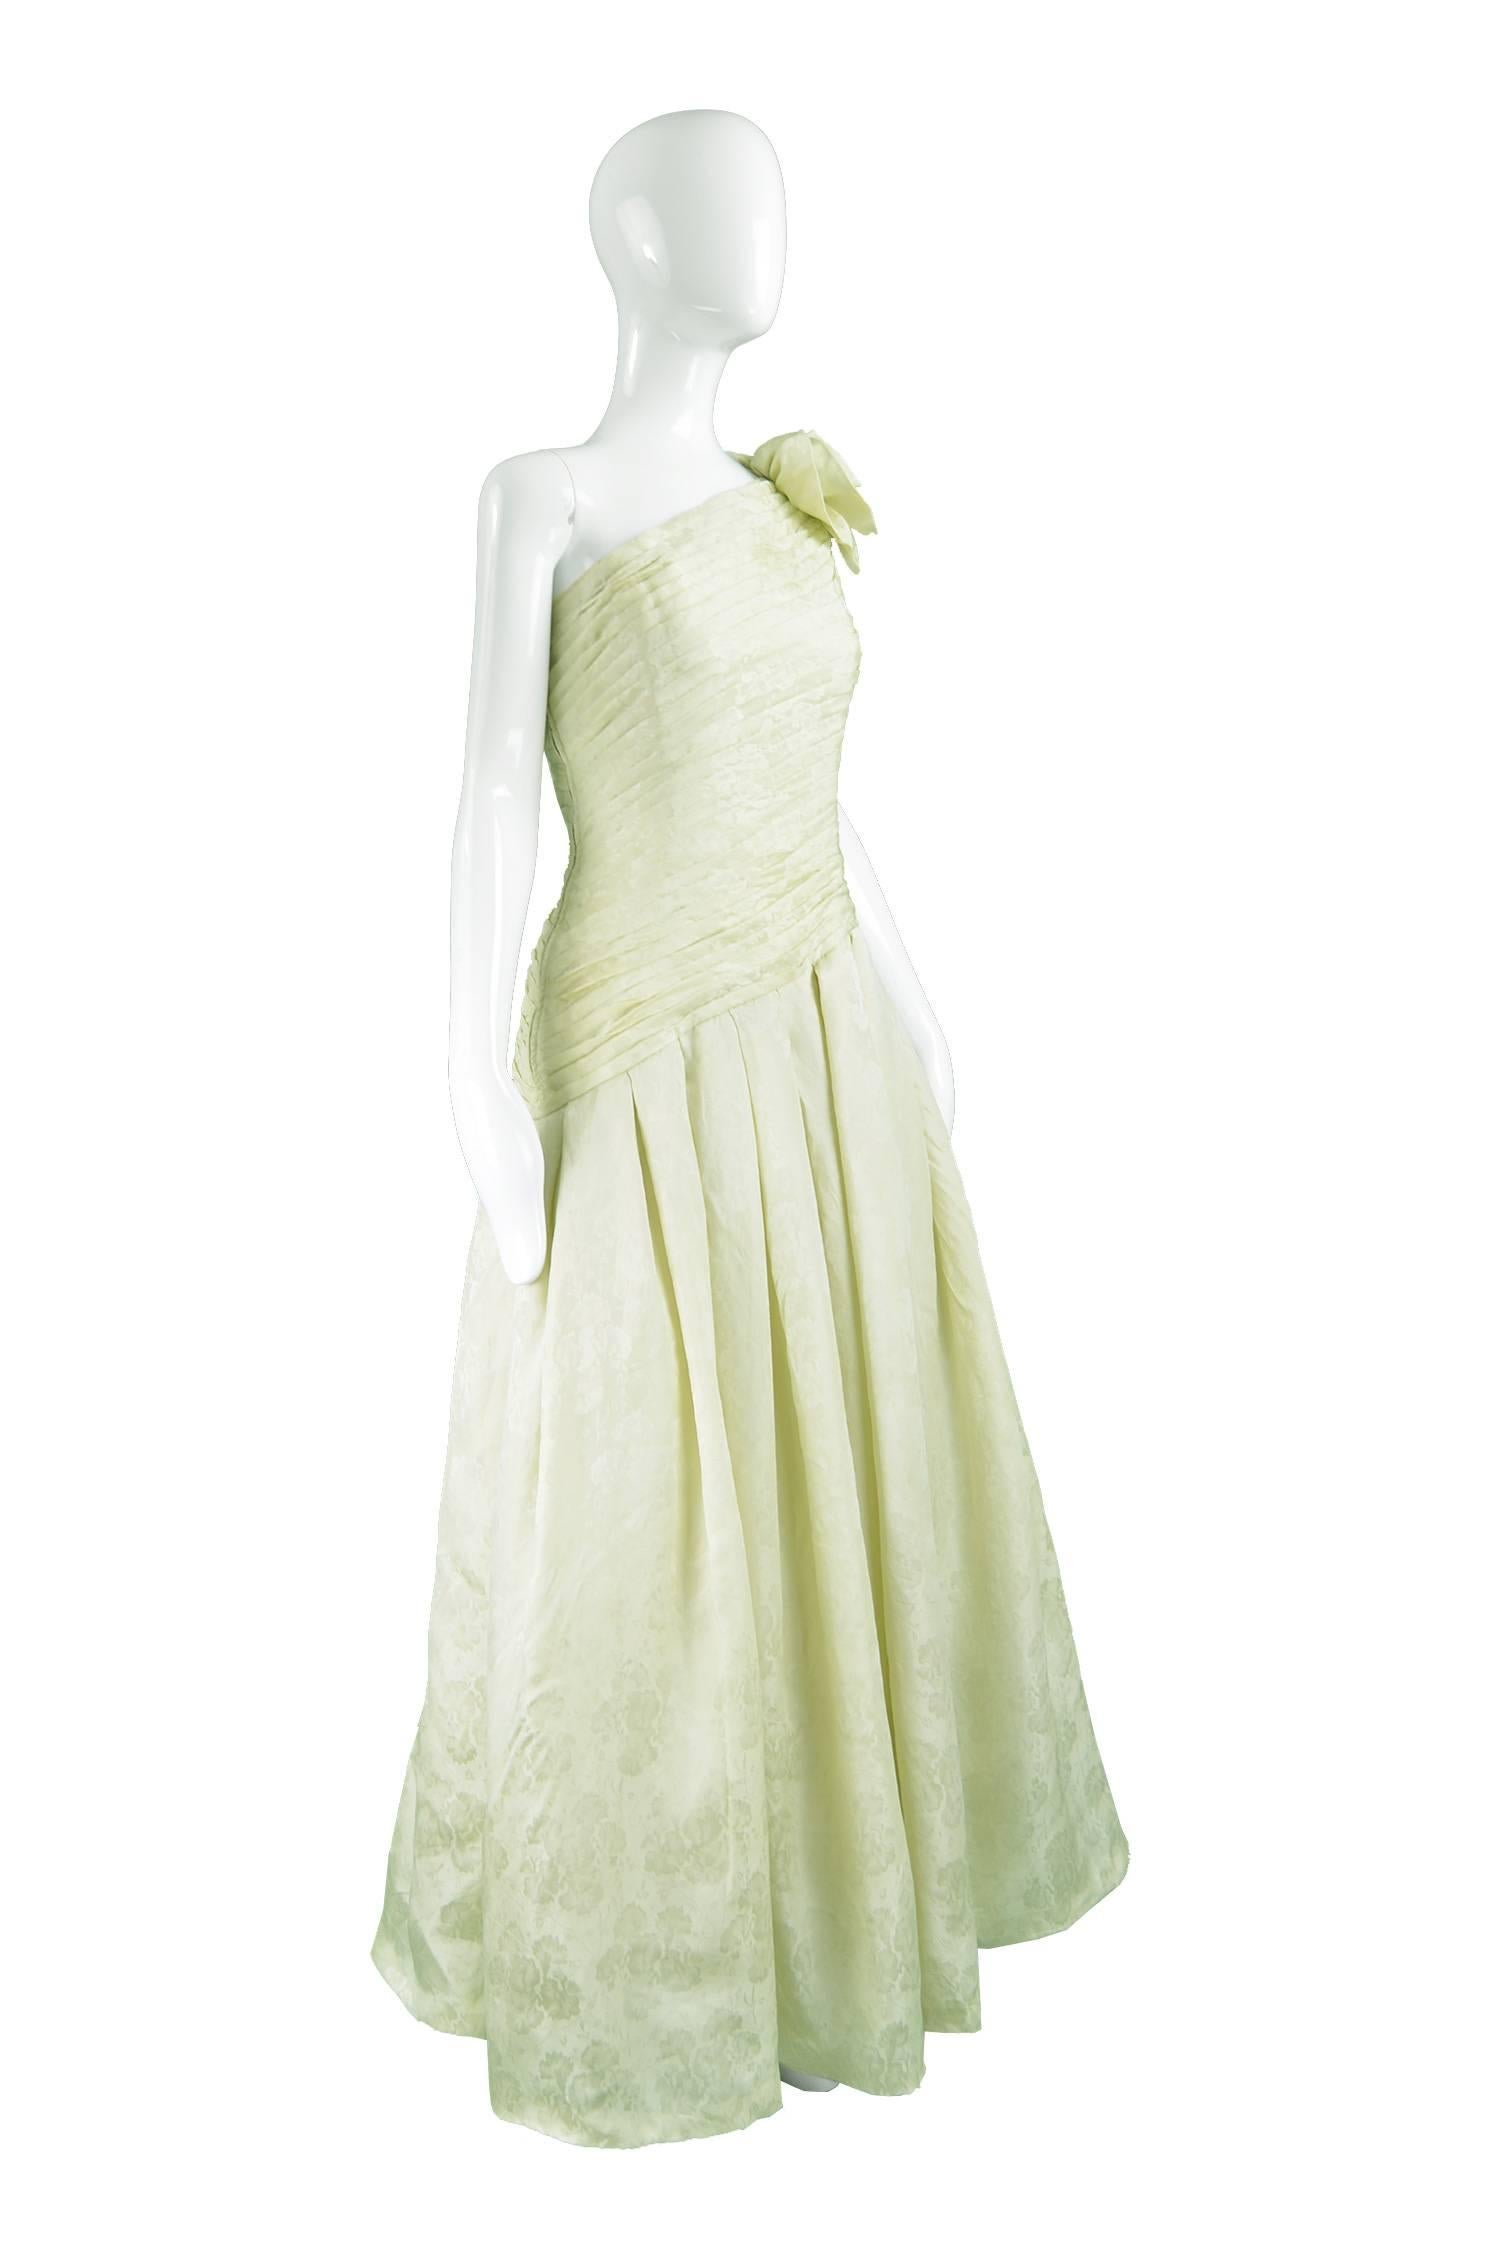 Women's Akira Isogawa One Shouldered Pleated Silk Jacquard Evening Gown, 1990s